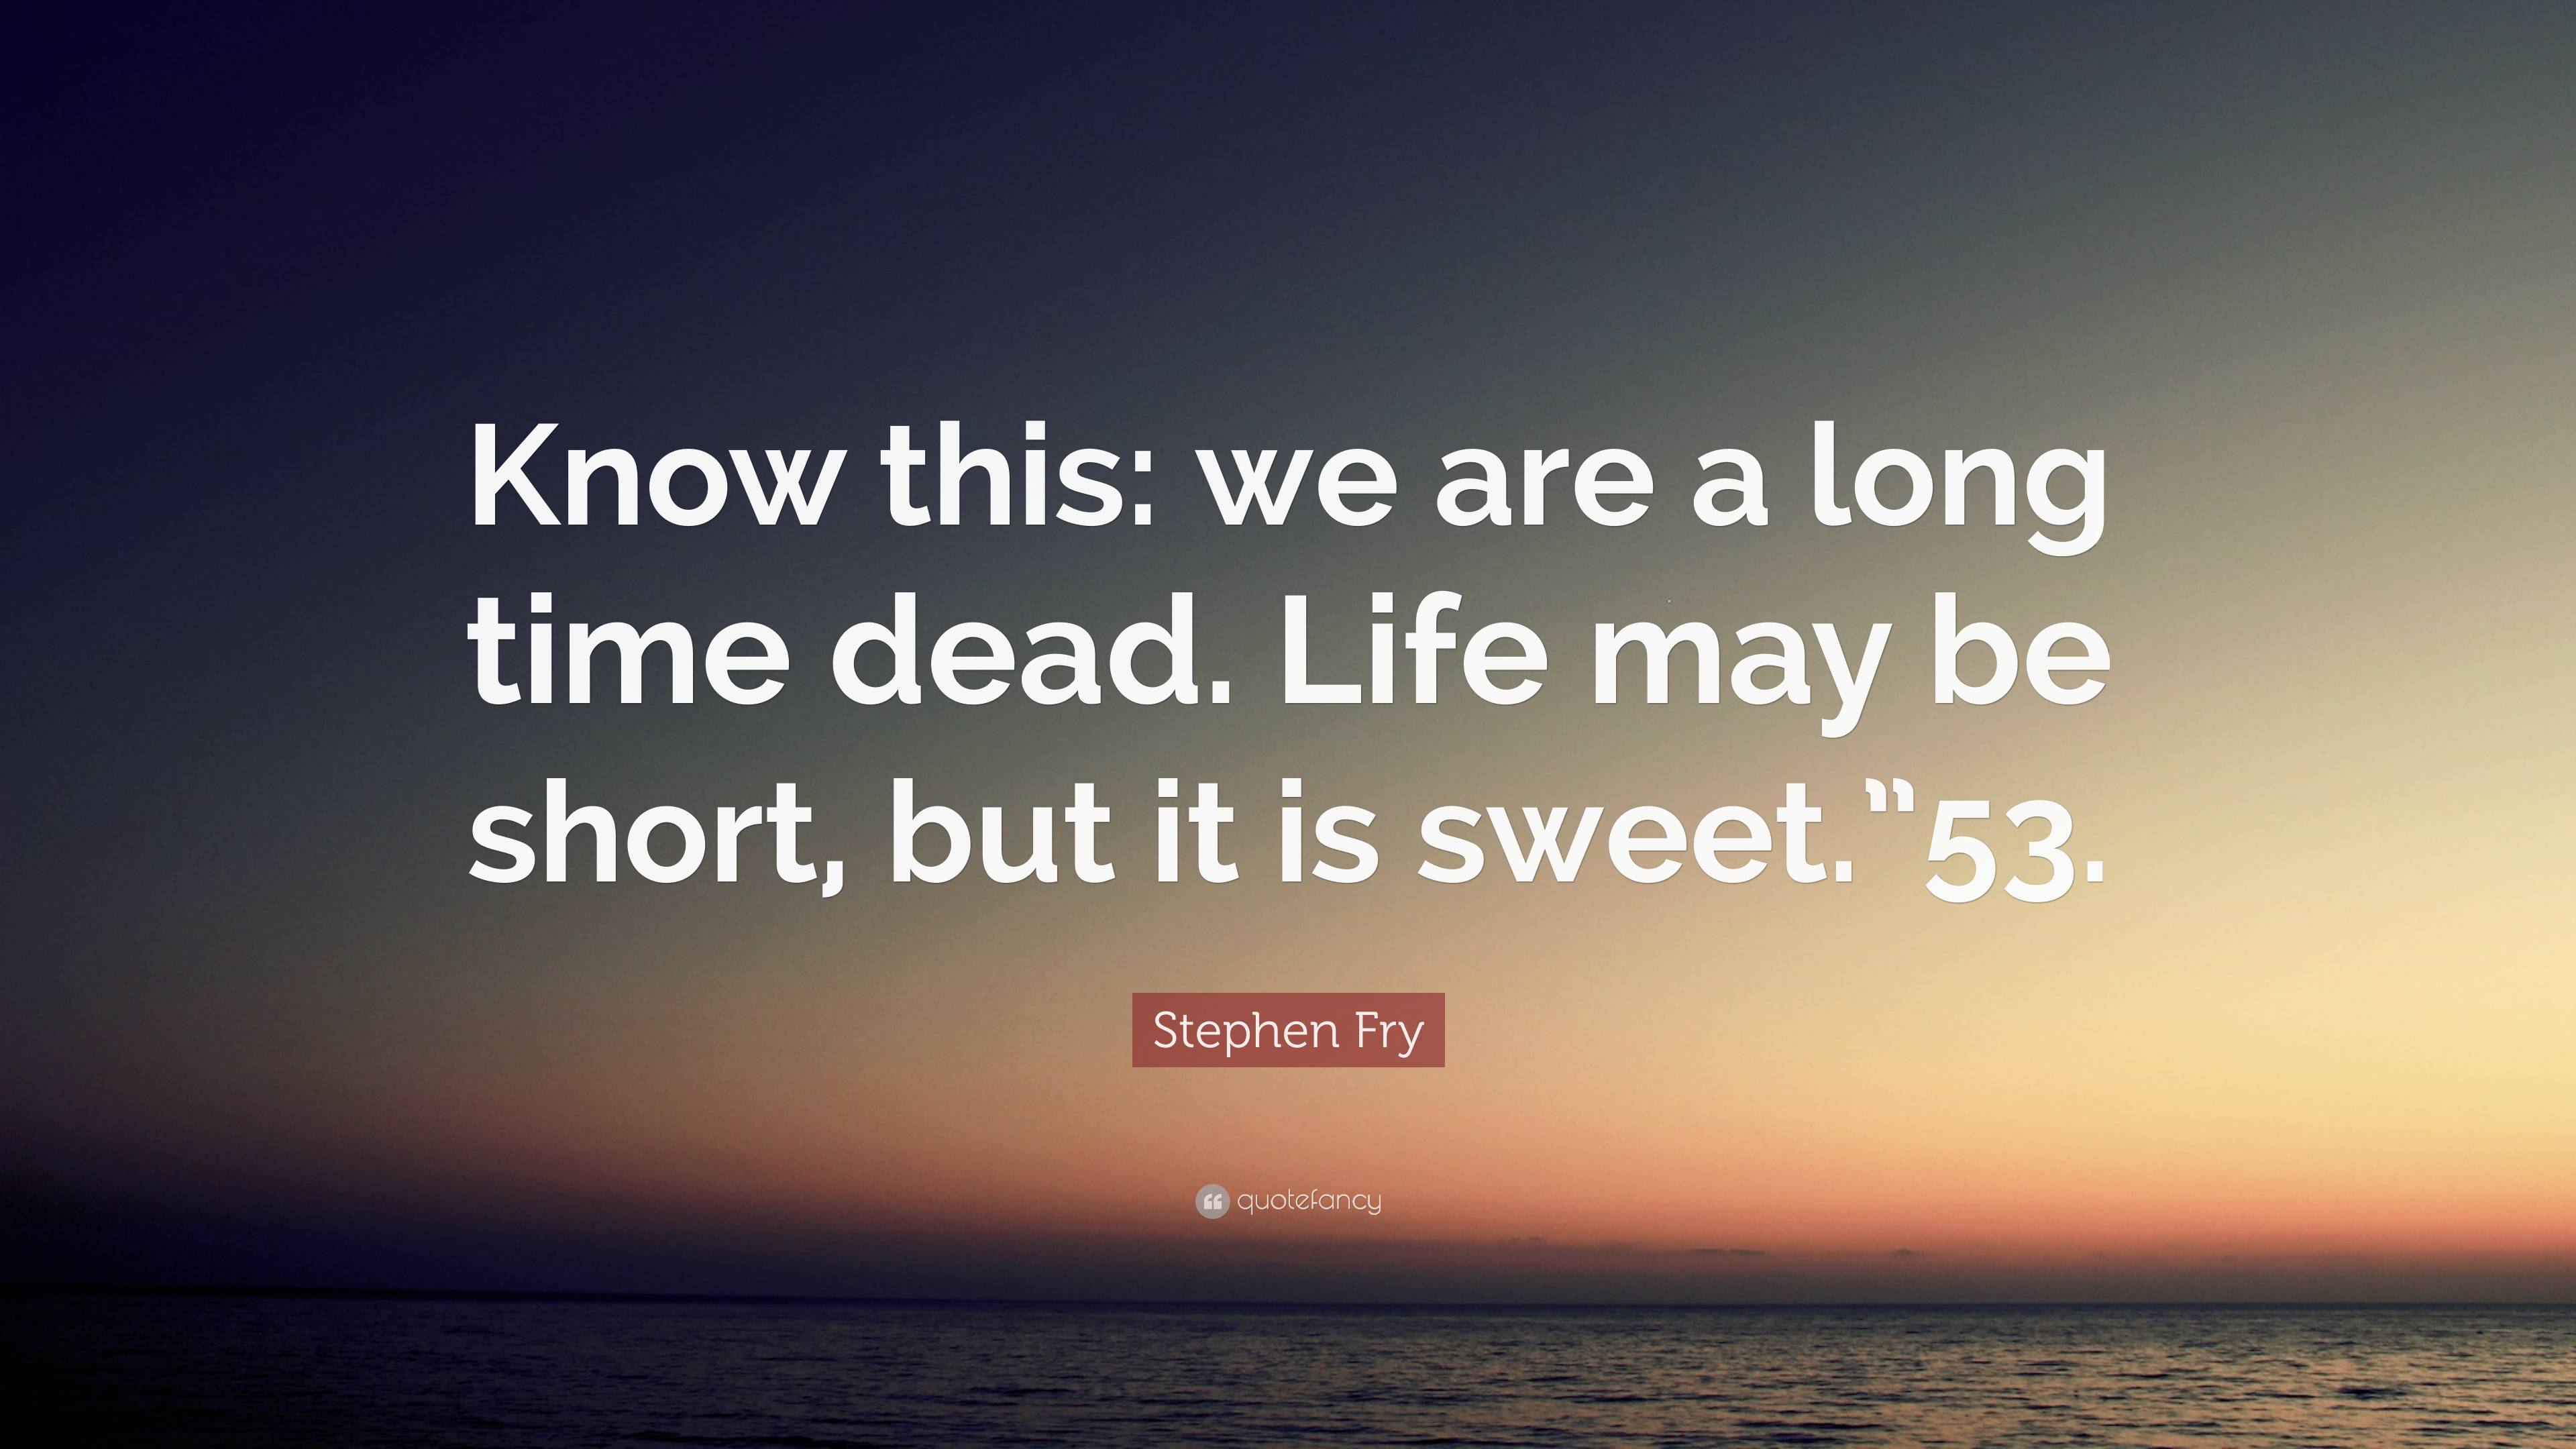 Stephen Fry Quote: “Know this: we are a long time dead. Life may be ...